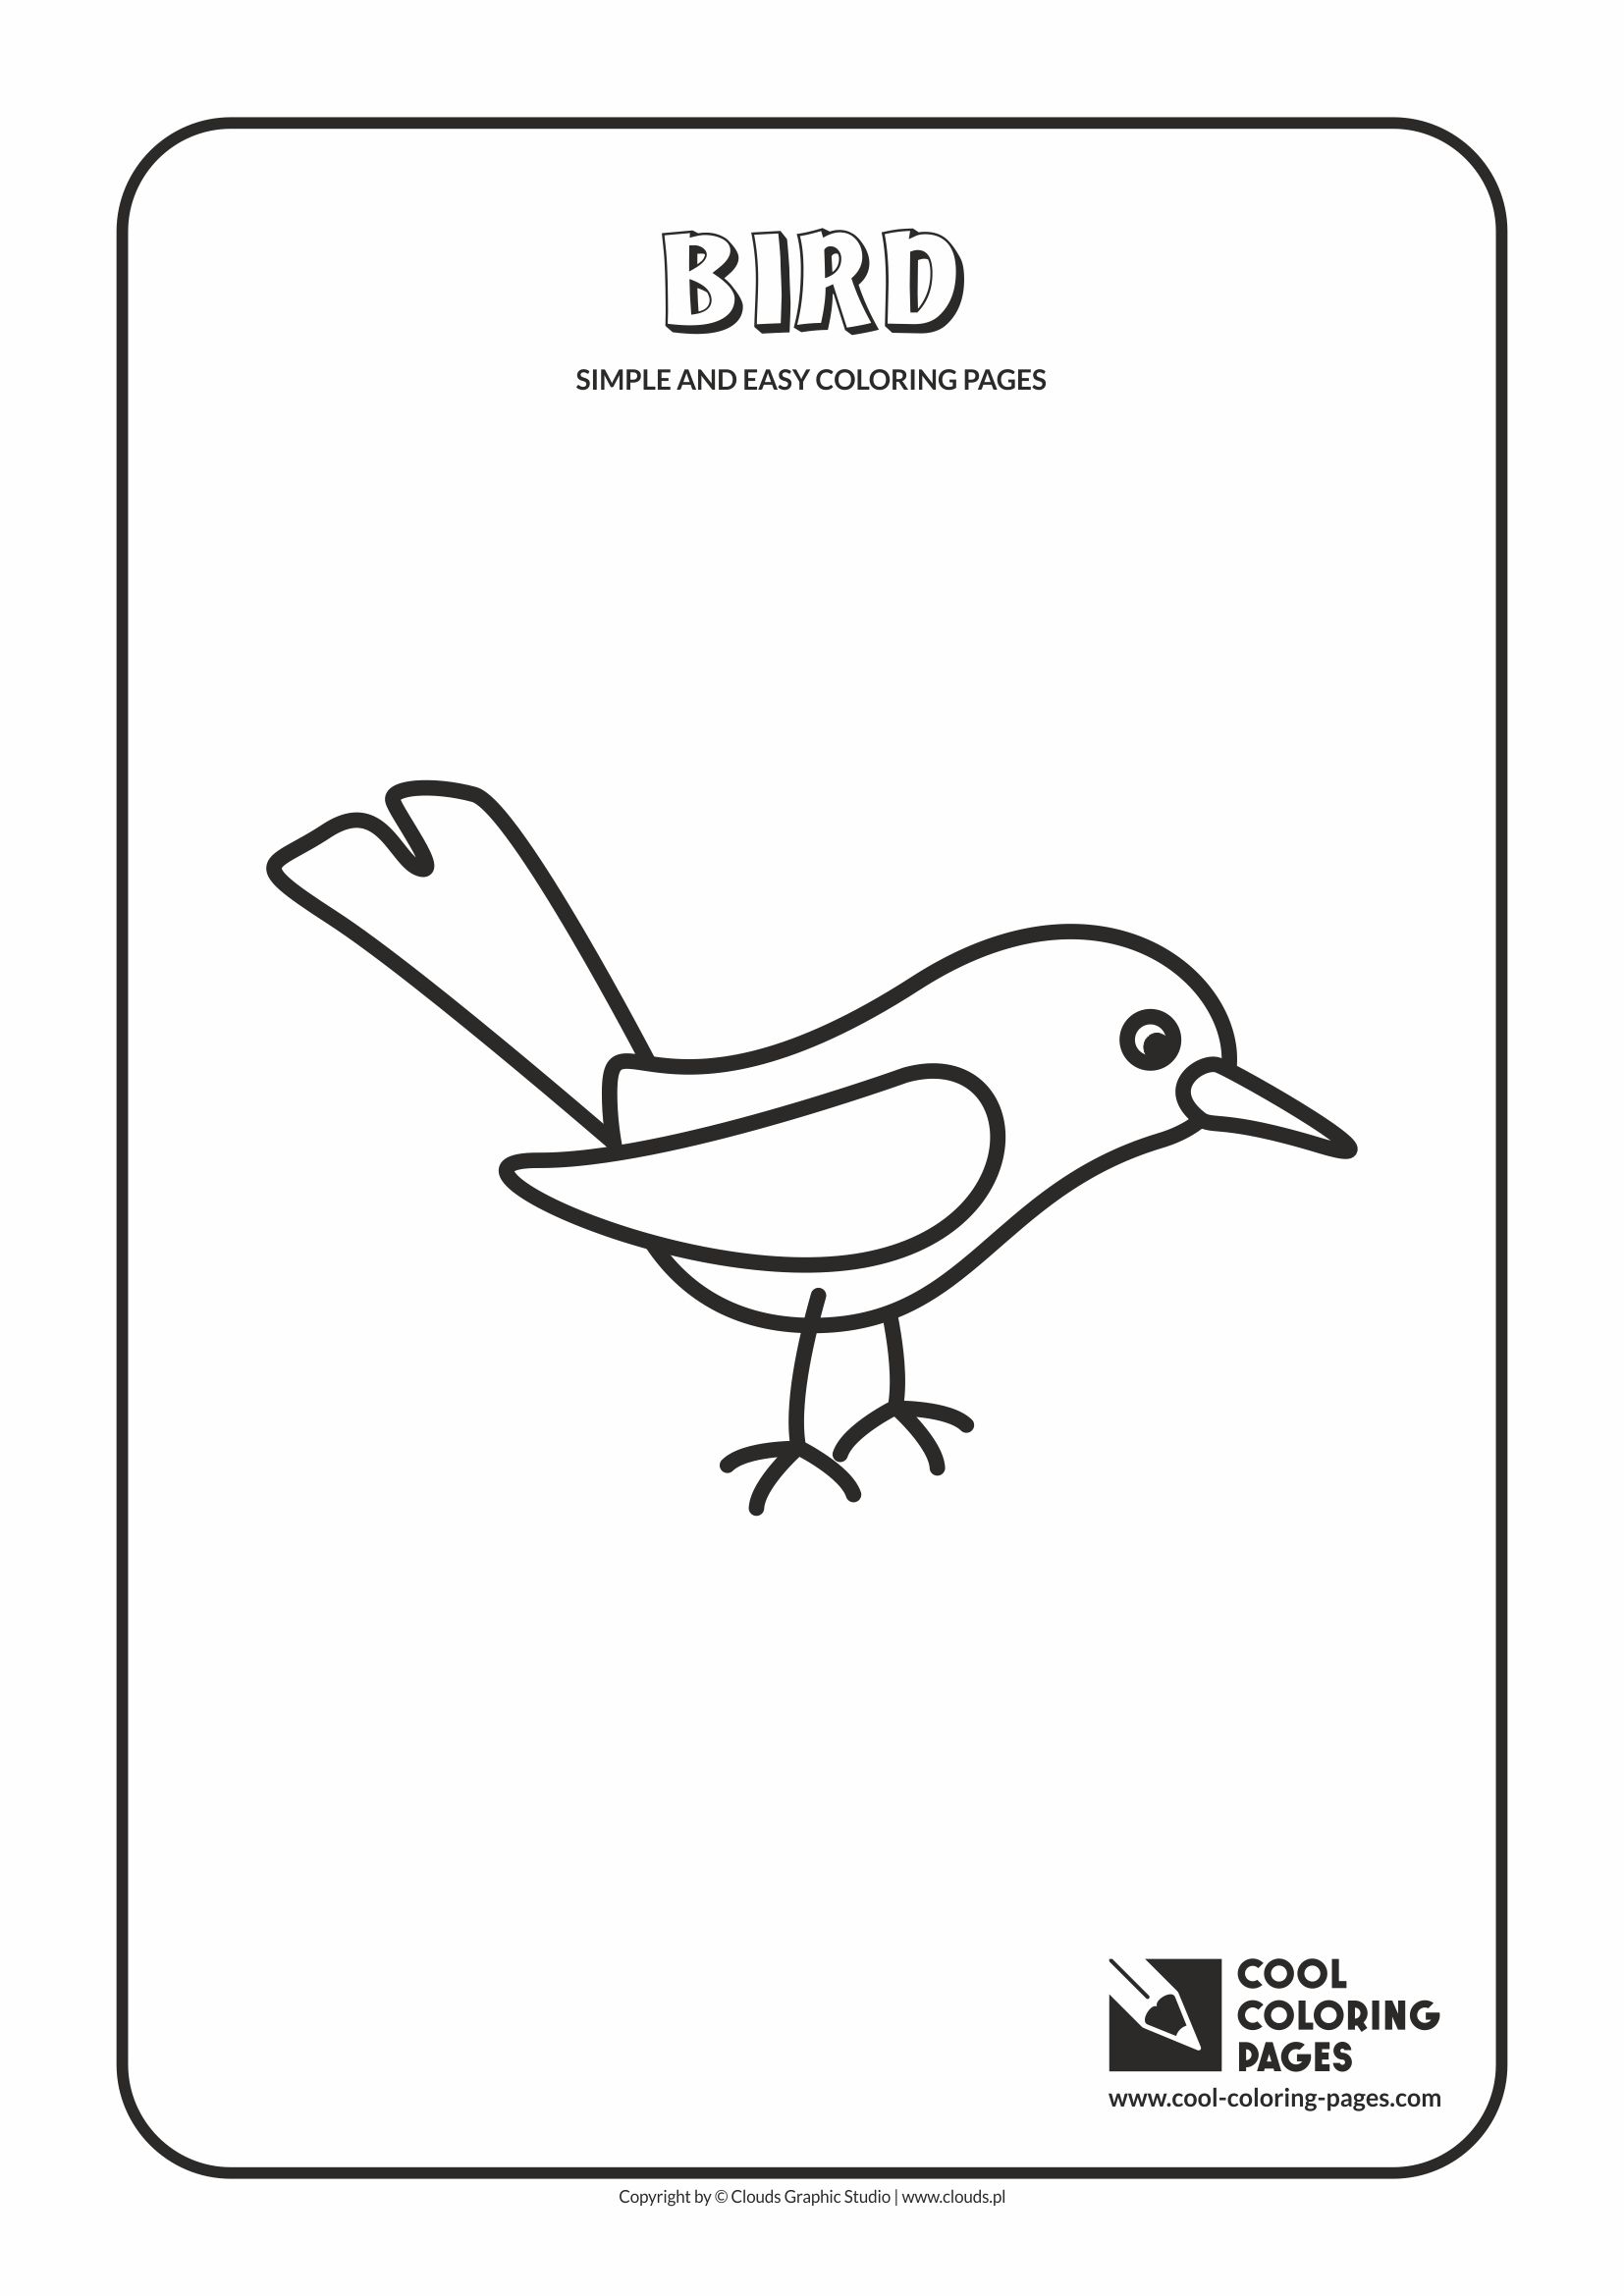 Simple and easy coloring pages for toddlers - Bird